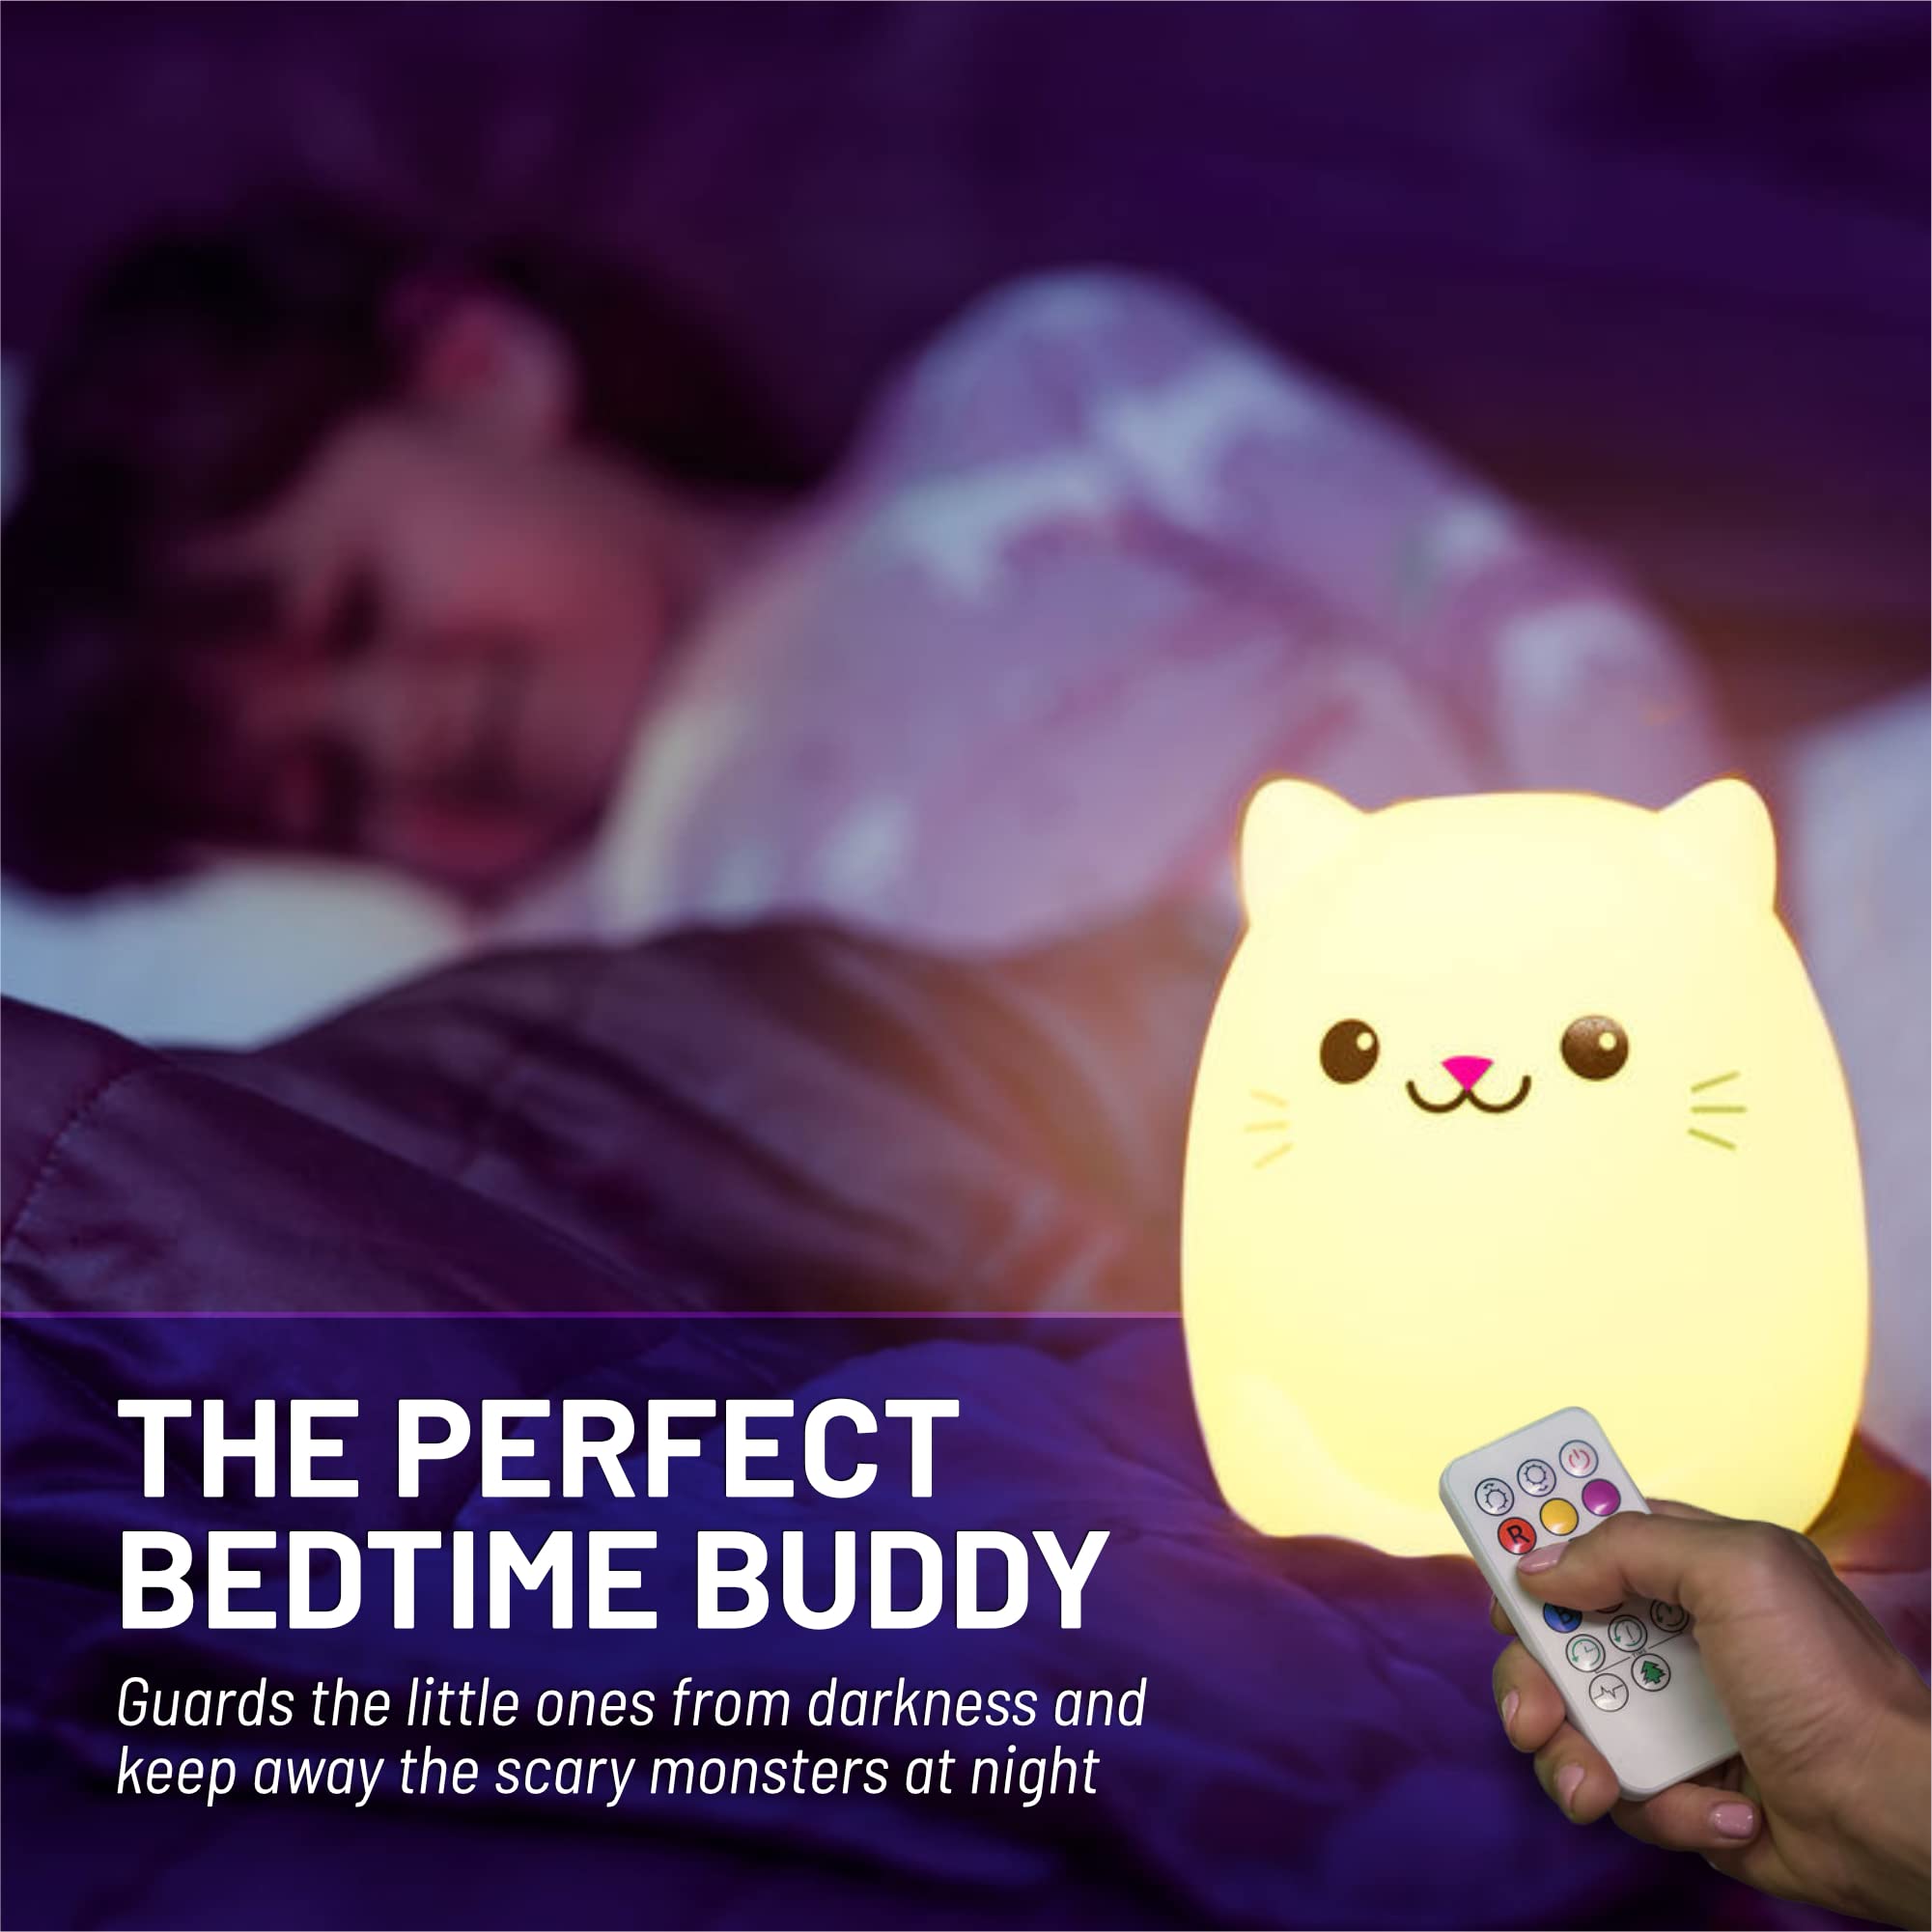 Lumipets Kitty Cat Portable Night Light for Kids, Silicone Nursery Light for Baby and Toddler Room, Rechargeable Animal Lights for Girls and Boys, Kawaii Lamp